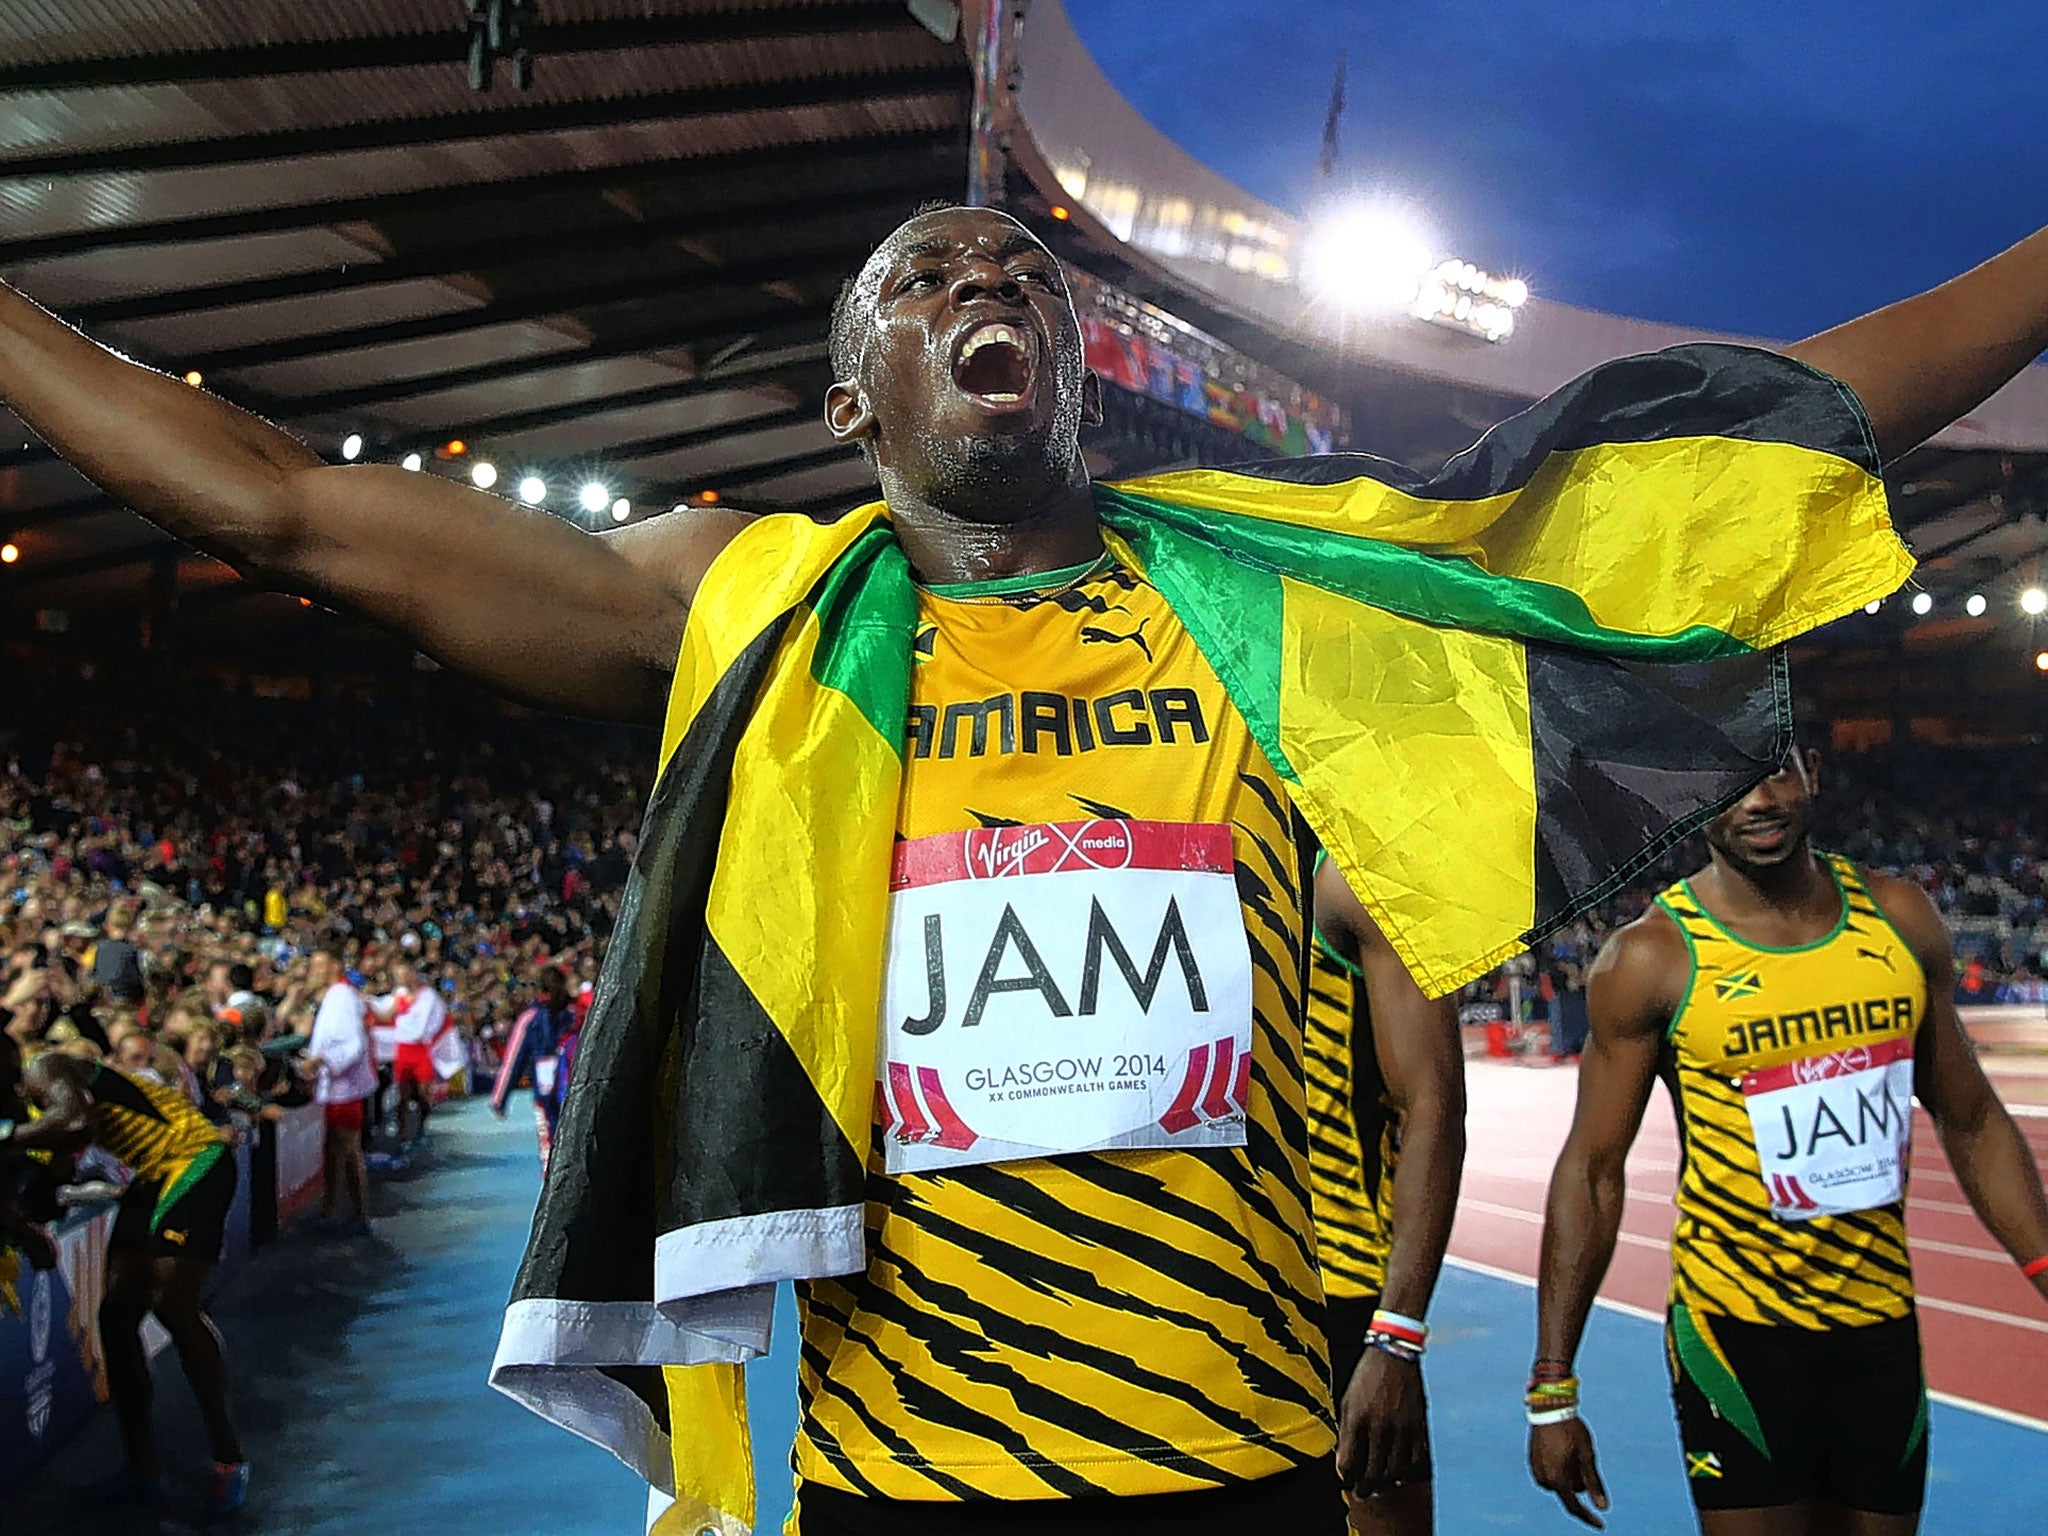 Usain Bolt celebrates after anchoring Jamaica to 4x100m relay gold in the Commonwealth Games in Glasgow last year